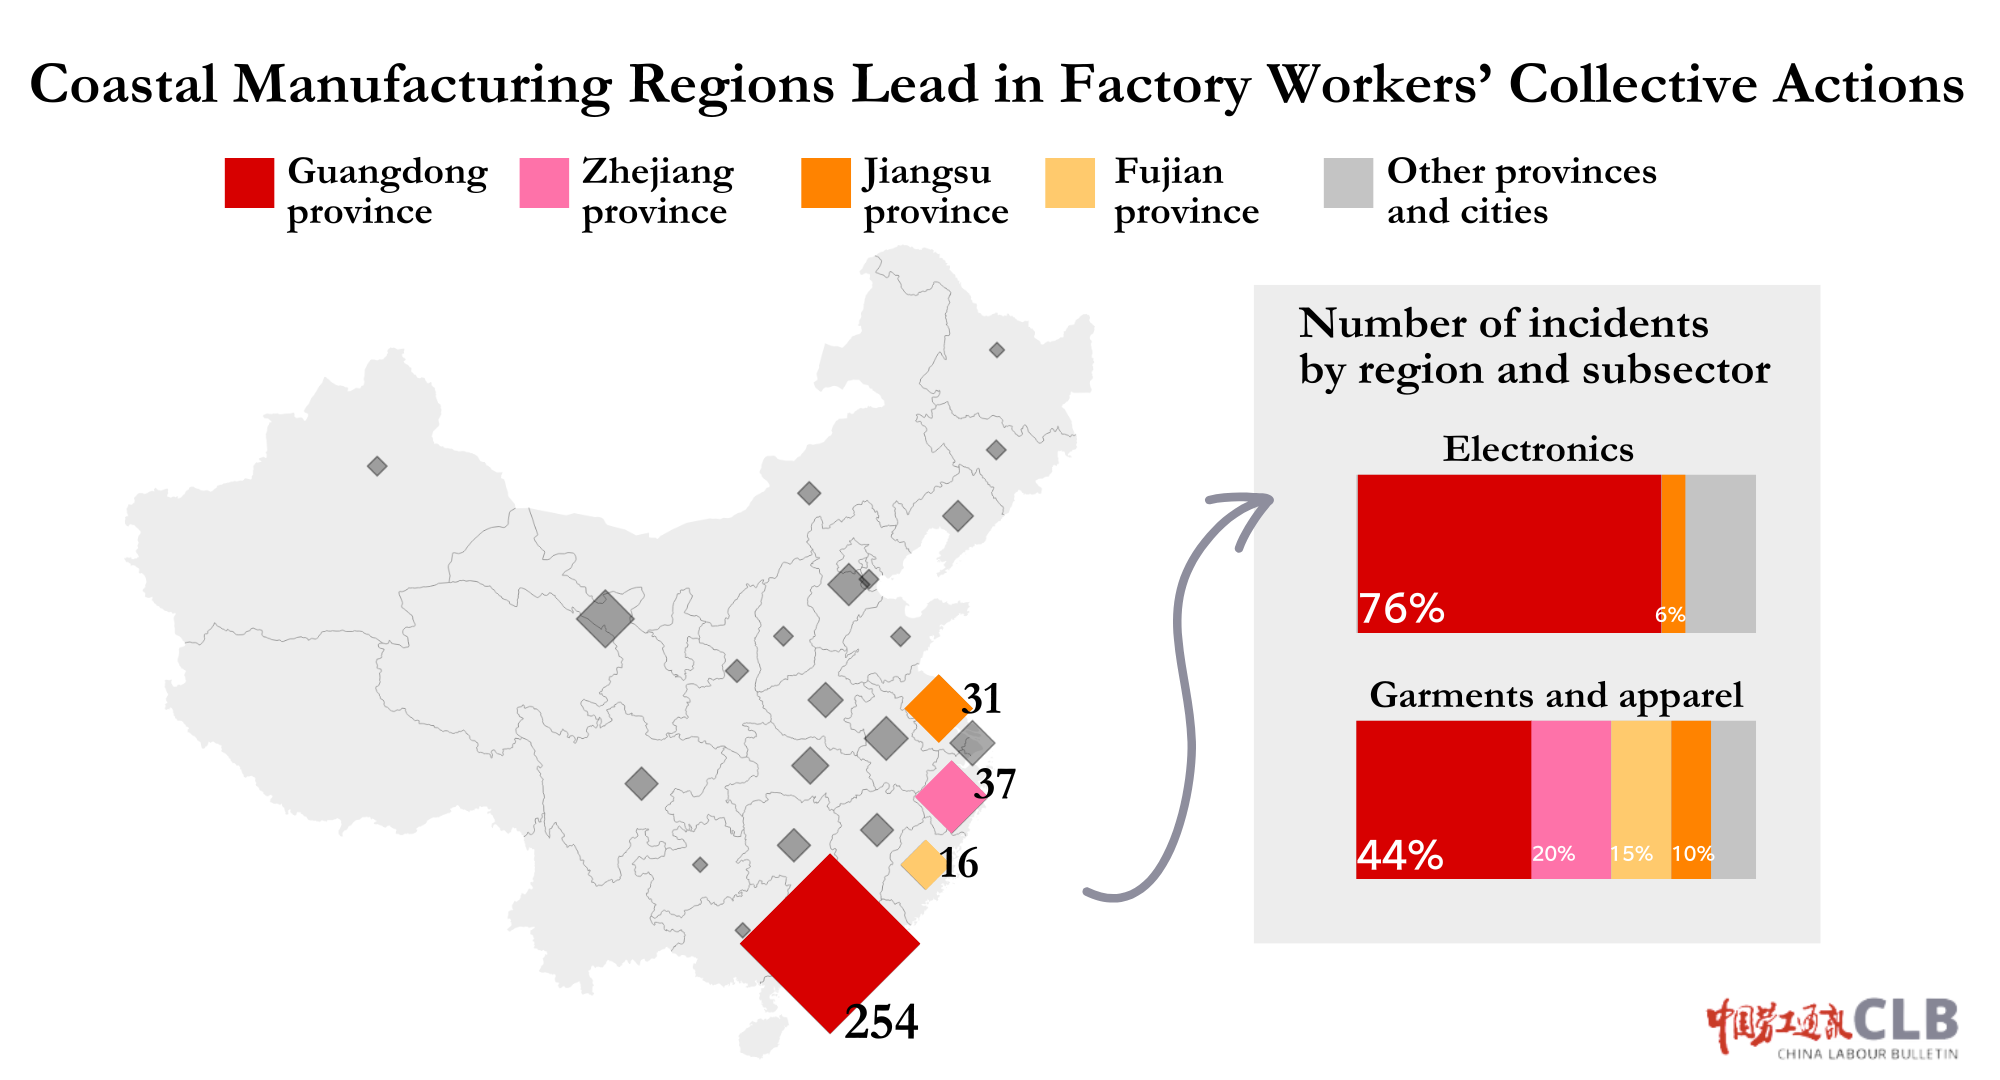 Coastal Manufacturing Regions Lead in Factory Workers' Collective Actions